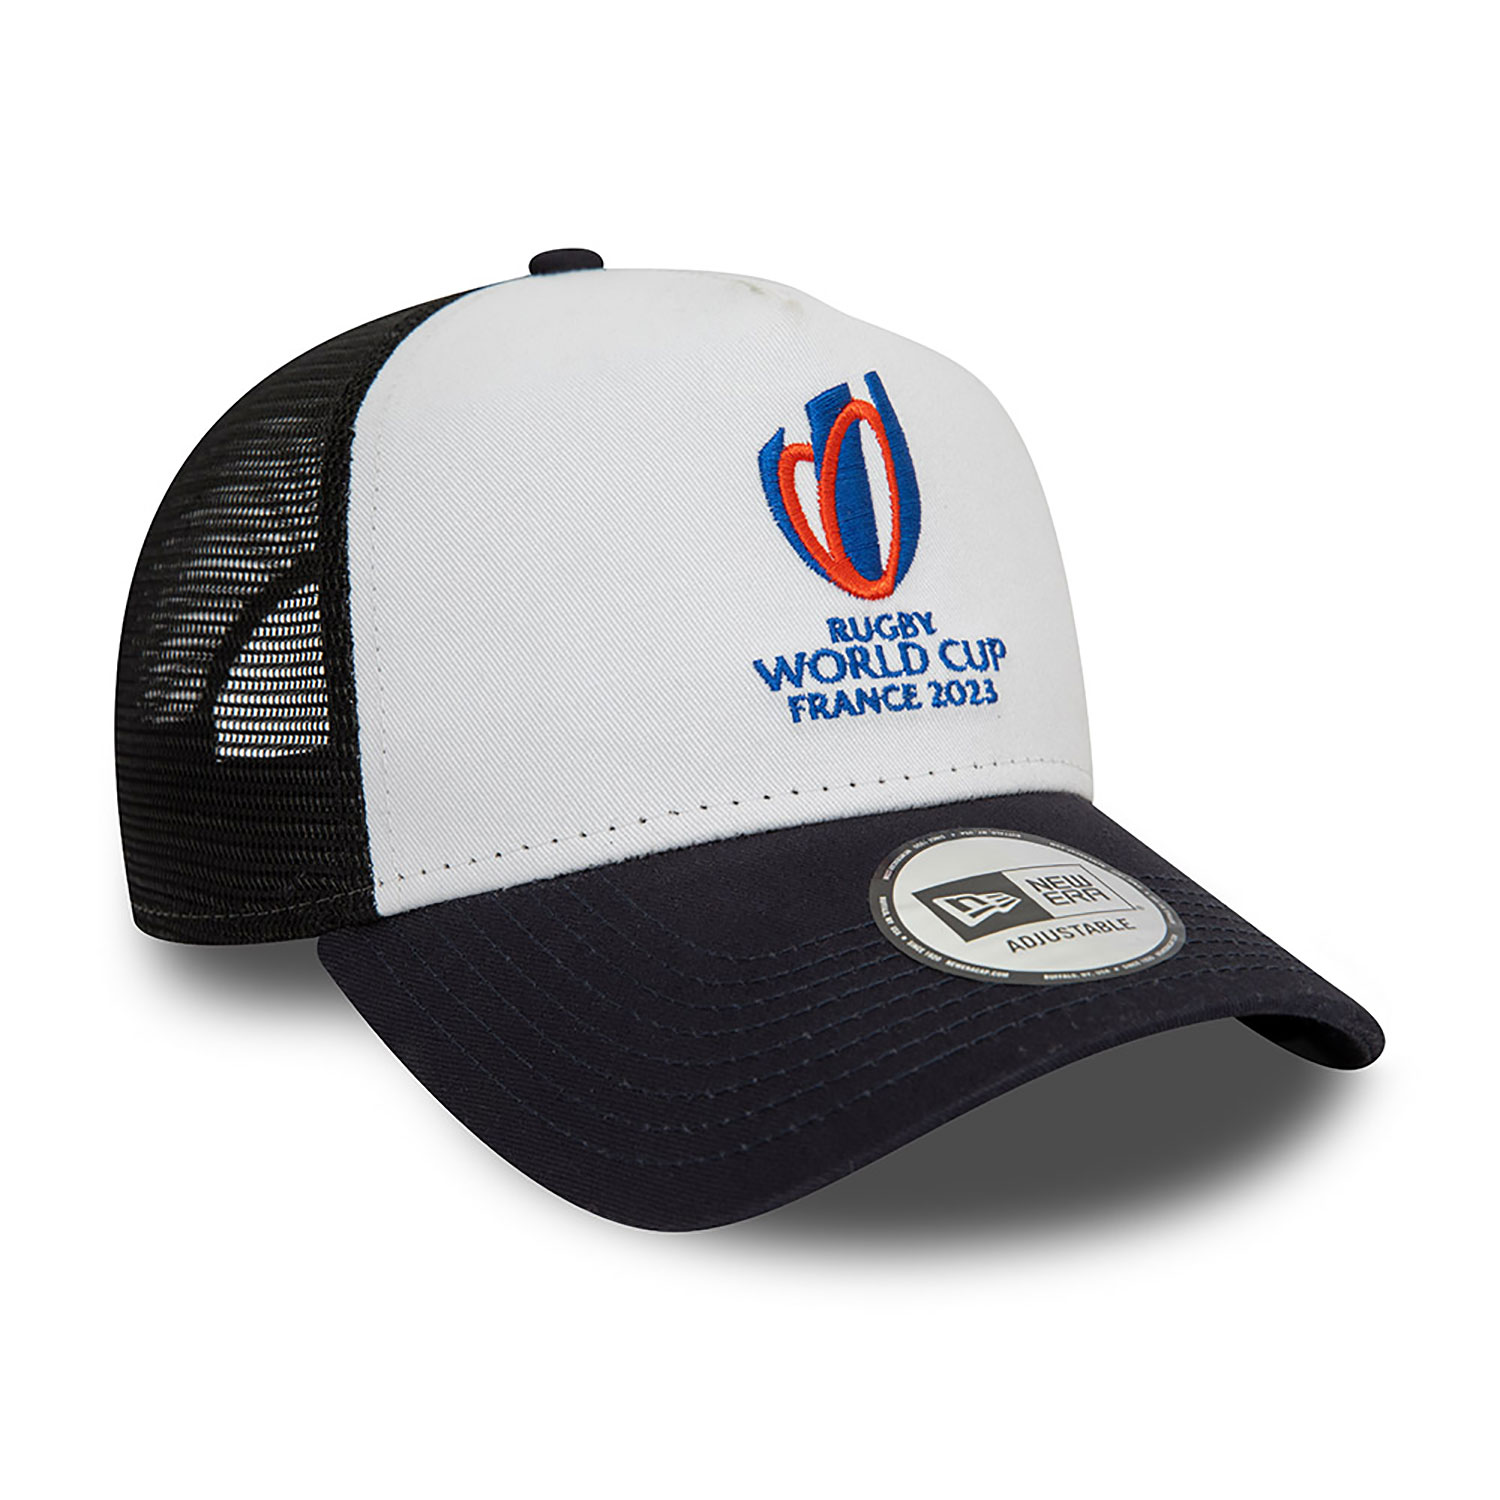 Rugby World Cup 2023 Black A-Frame Trucker Cap